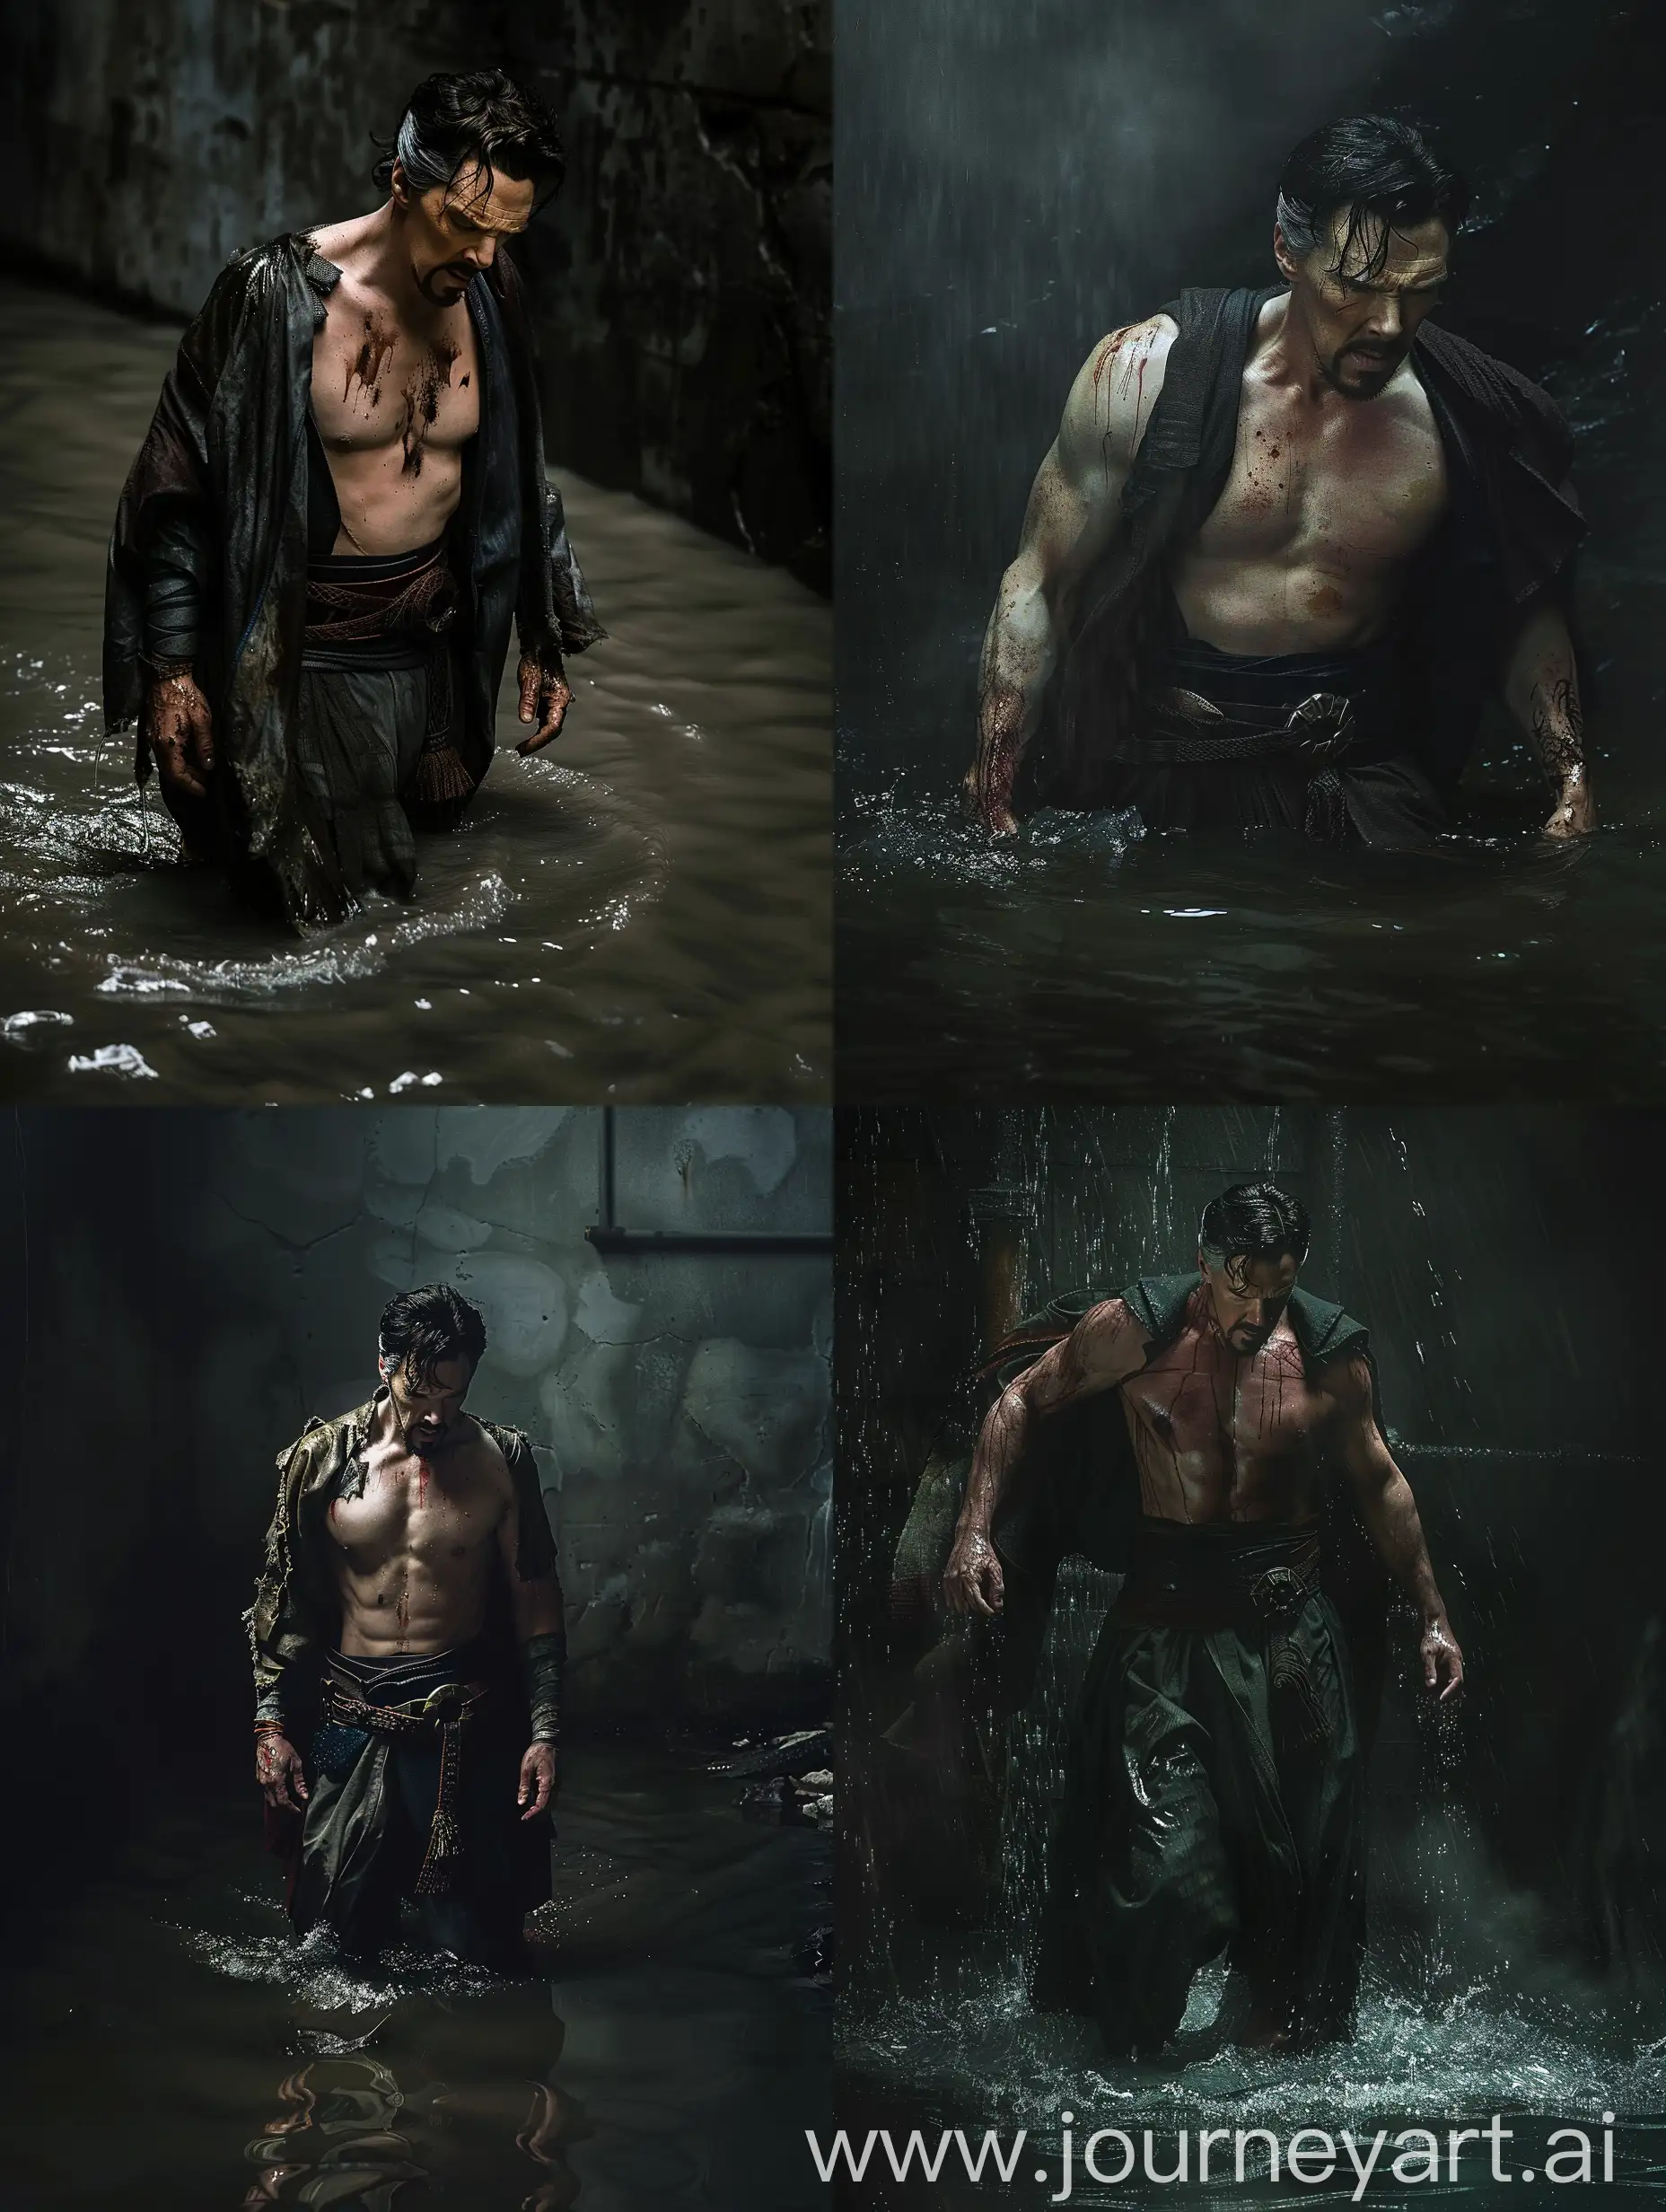 Desperate-Doctor-Strange-in-Ripped-Outfit-Amid-Rising-Water